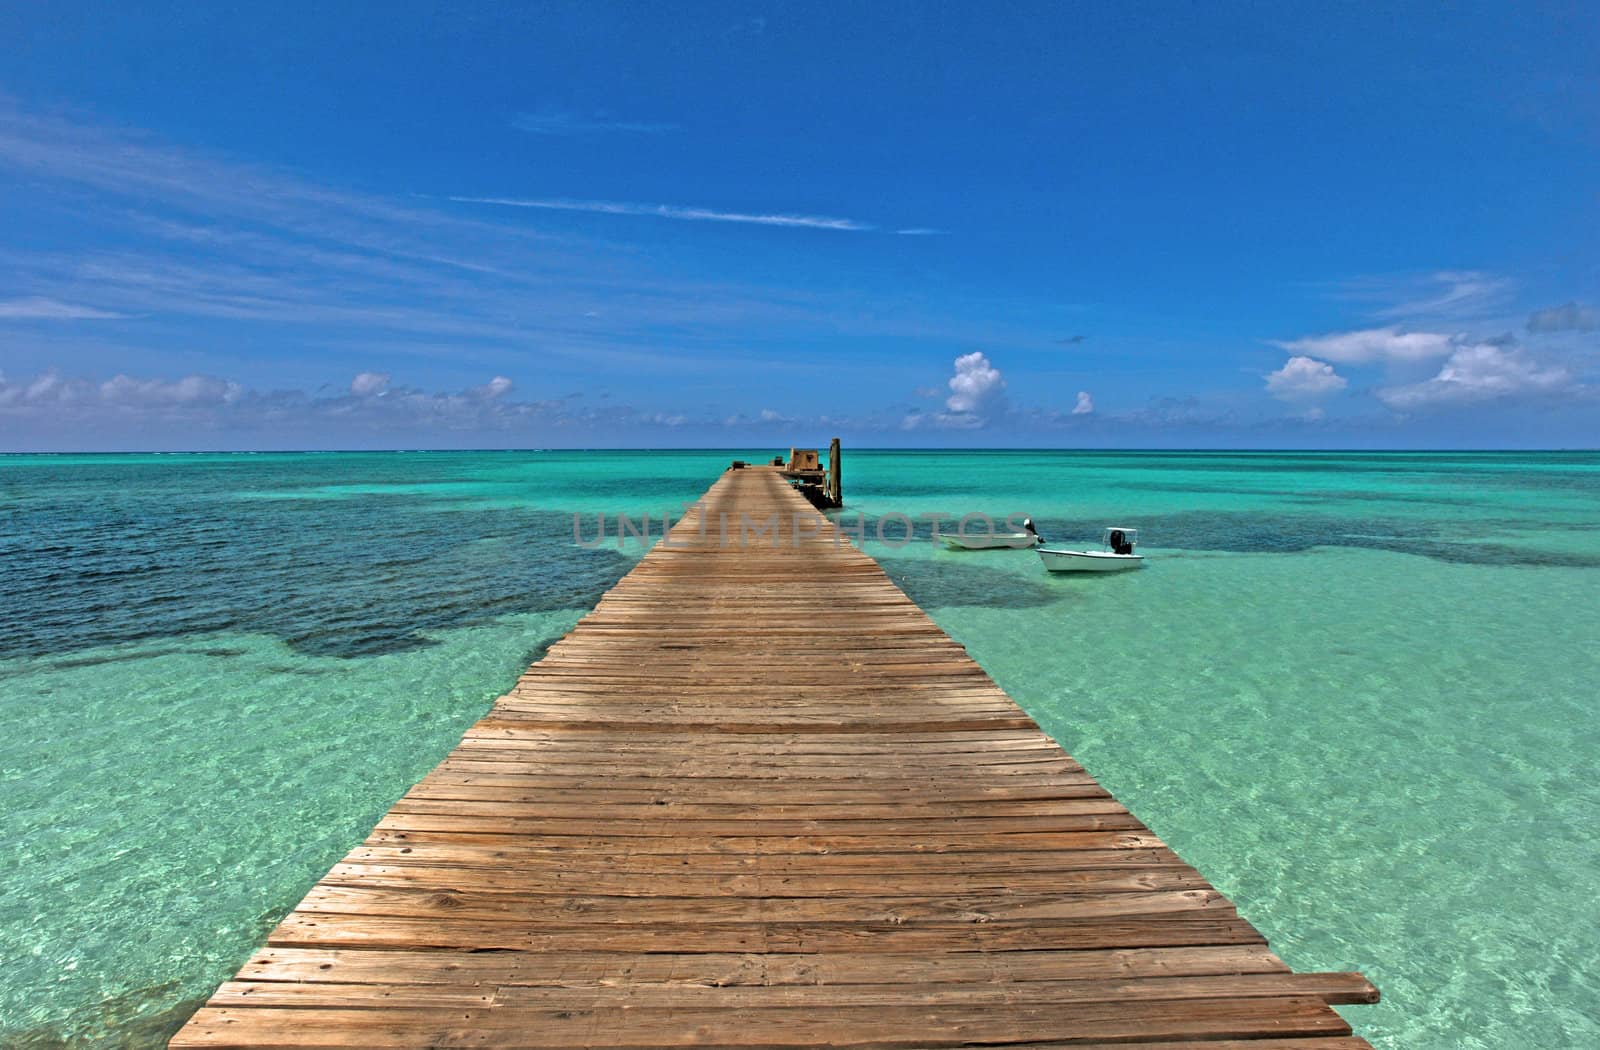 Pier in Bahamas in remote tropical location